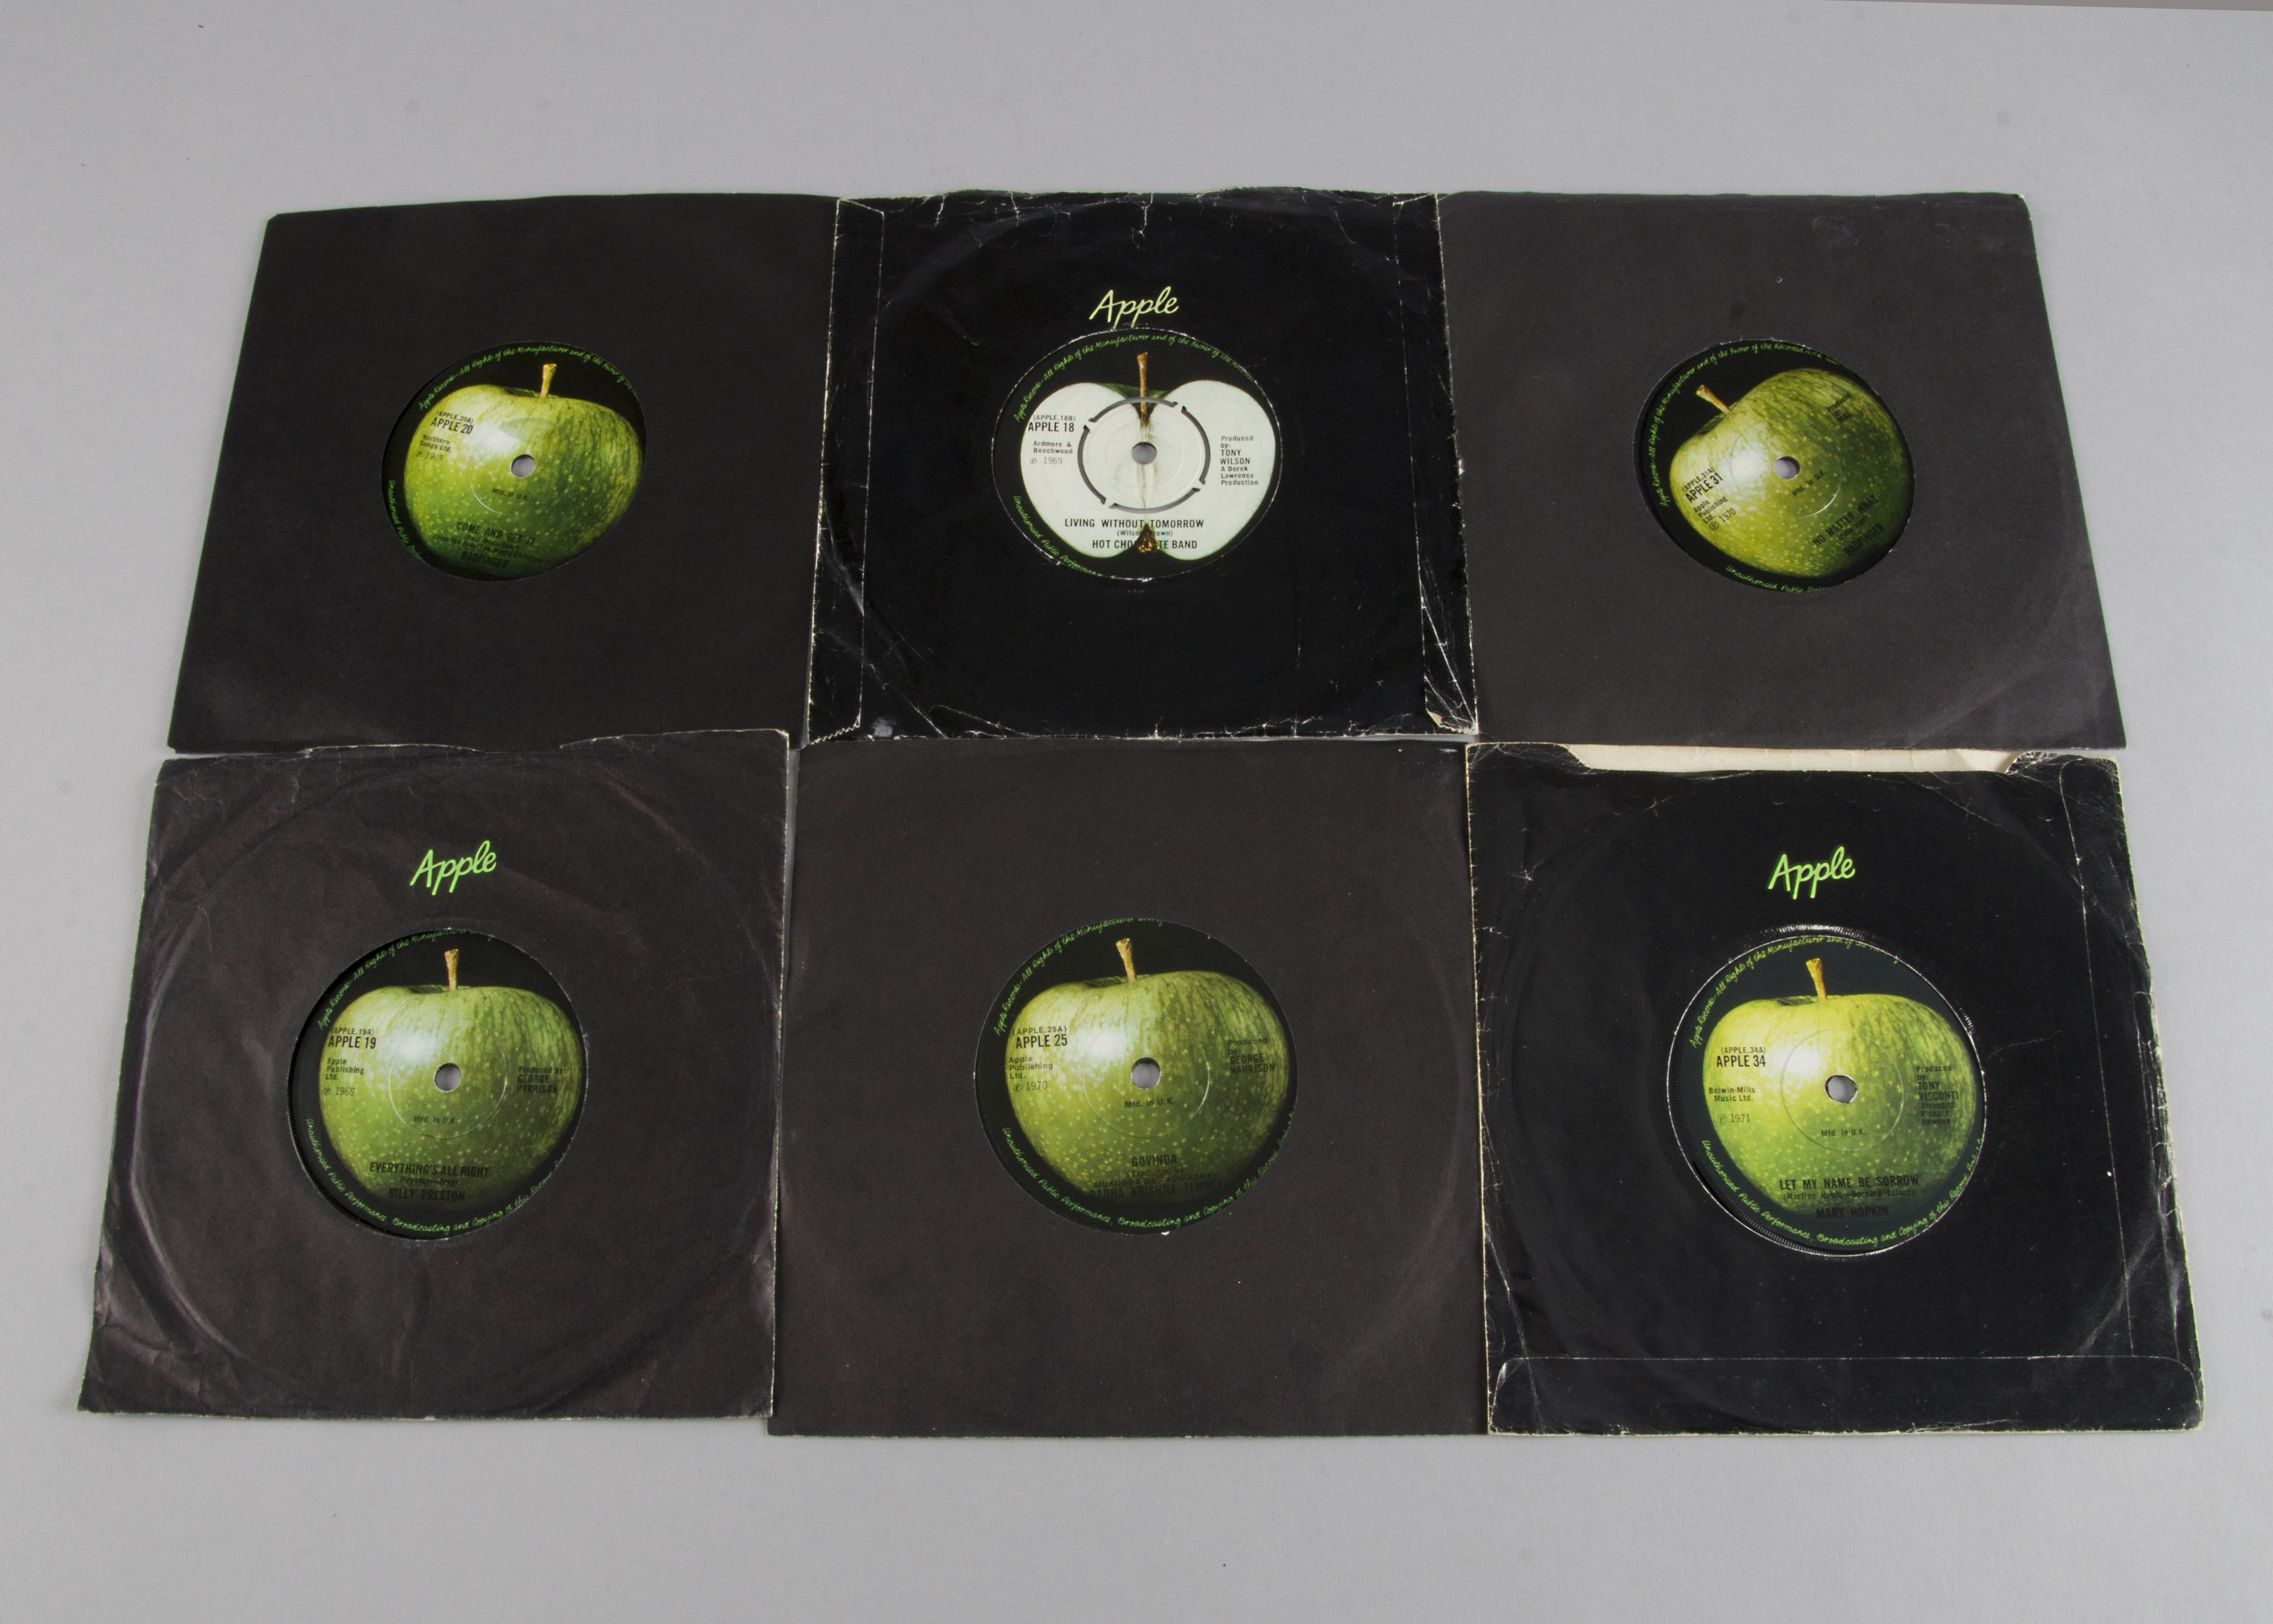 Apple Label, thirteen original 7" singles on the apple label with artists including Trash, Hot